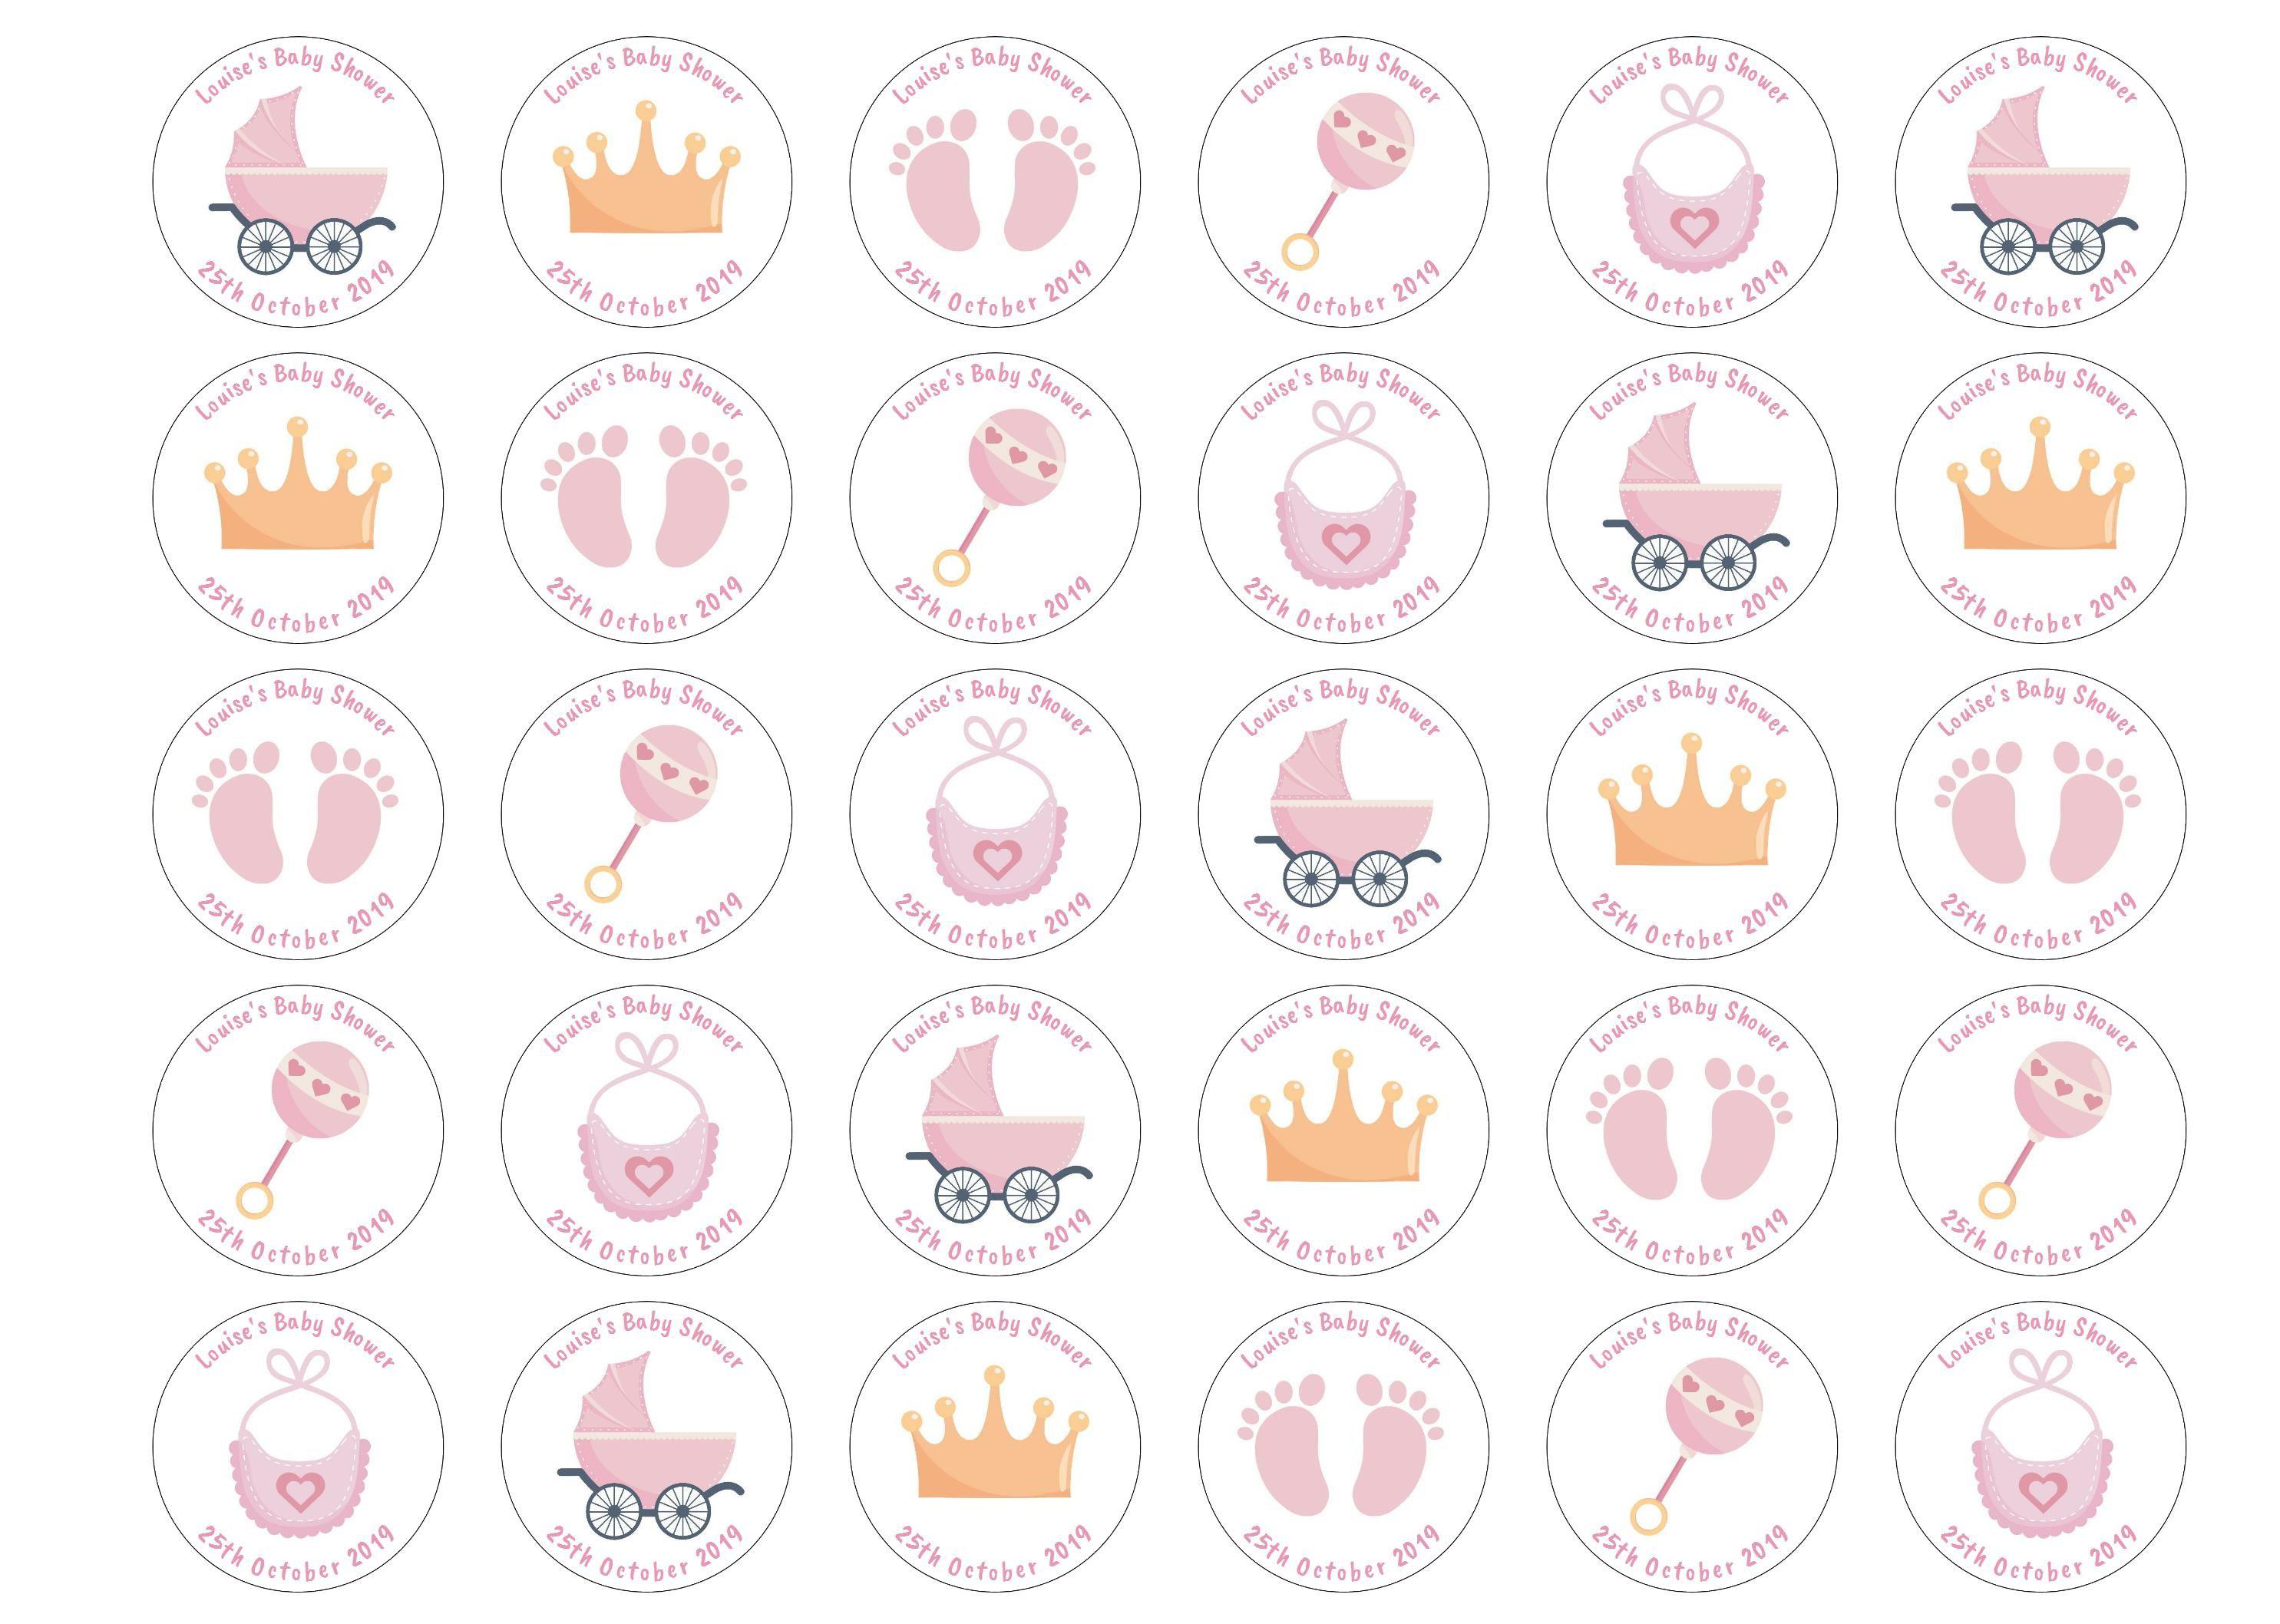 30 edible baby shower toppers with pink baby images